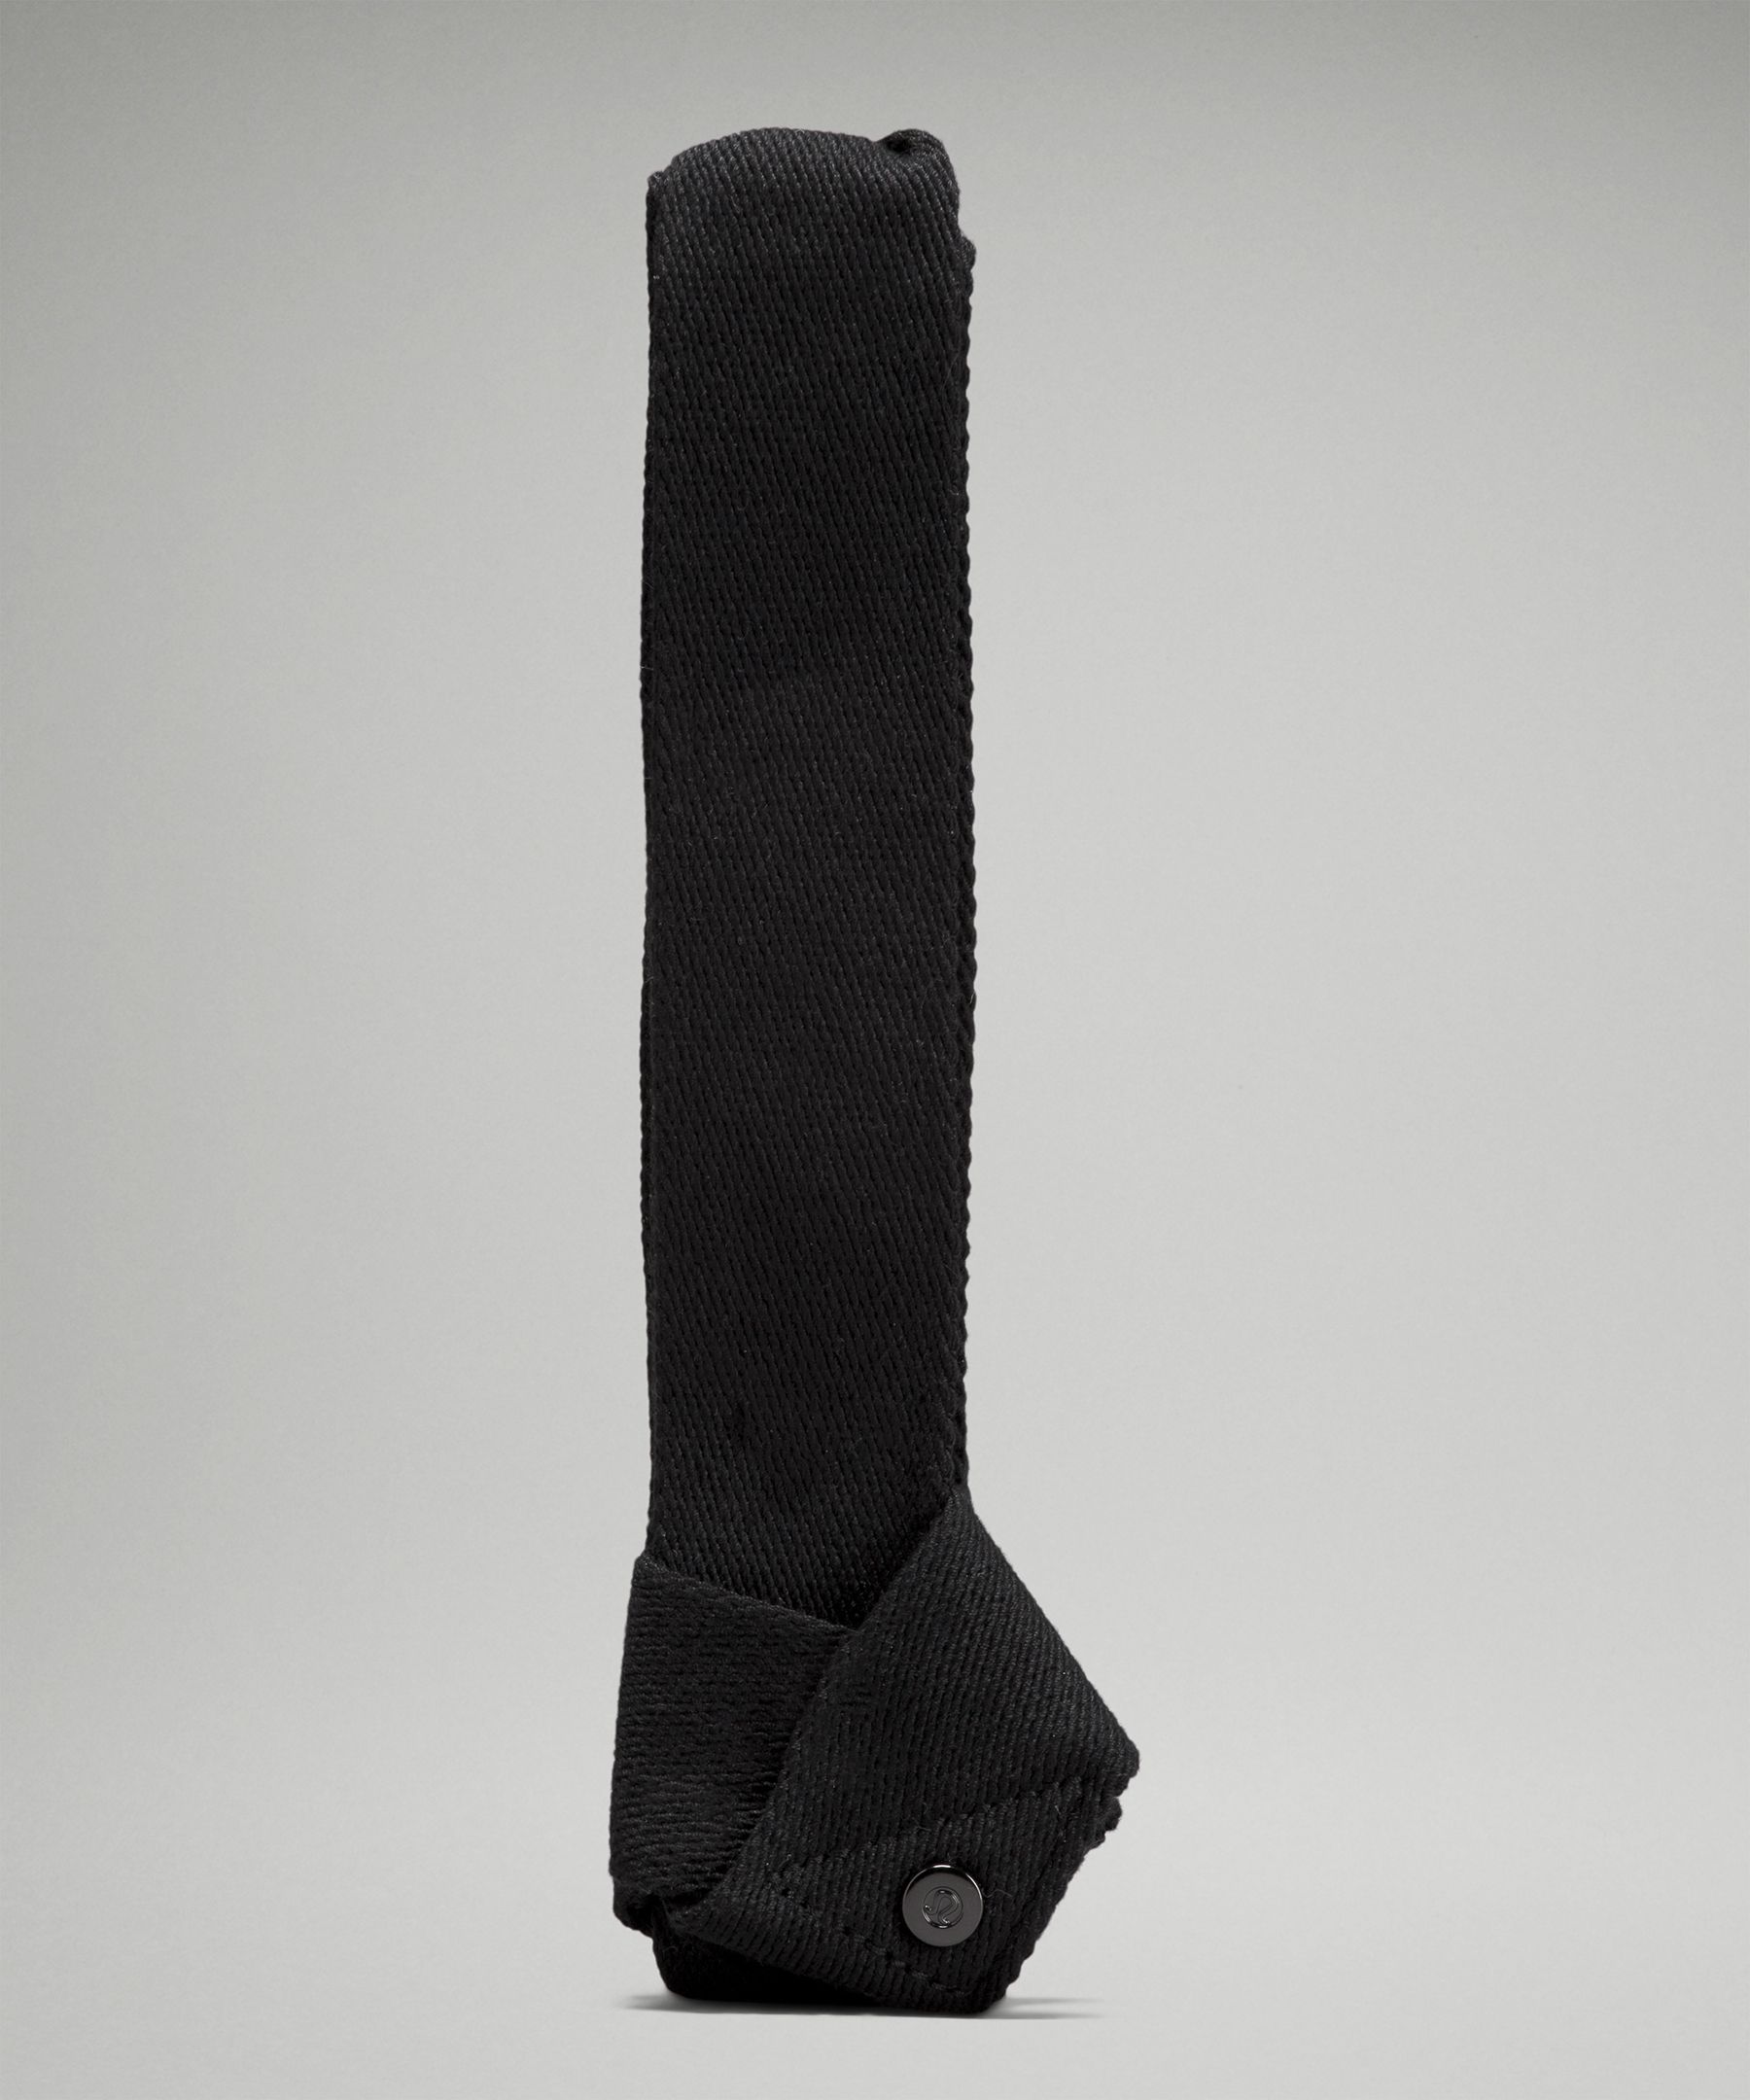 Clearance Sale Lululemon Equipment - Black Stow and Flow Mat Strap  Accessories